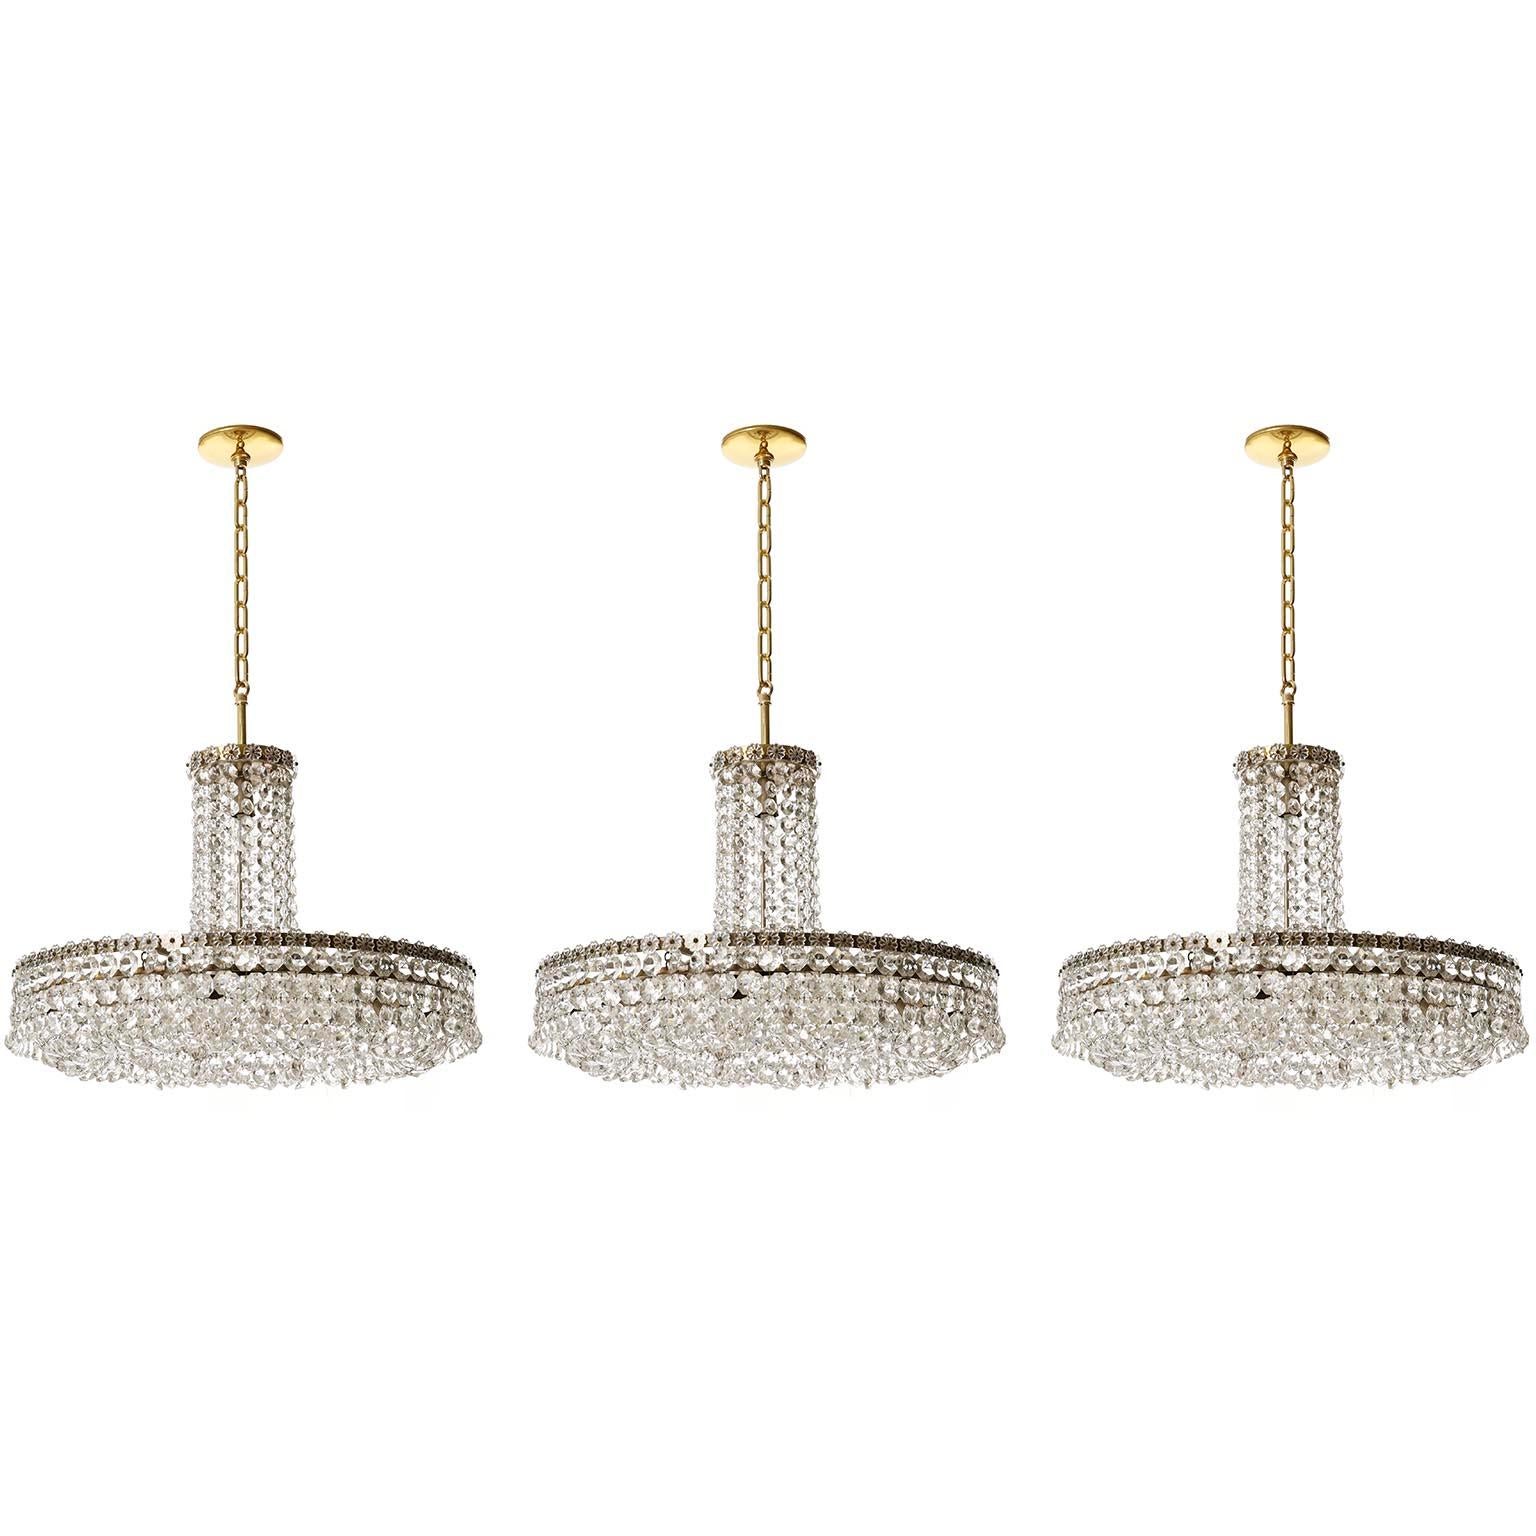 Four Large Bakalowits Wall Lights Sconces, Brass Nickel Crystal, Austria, 1950s For Sale 4